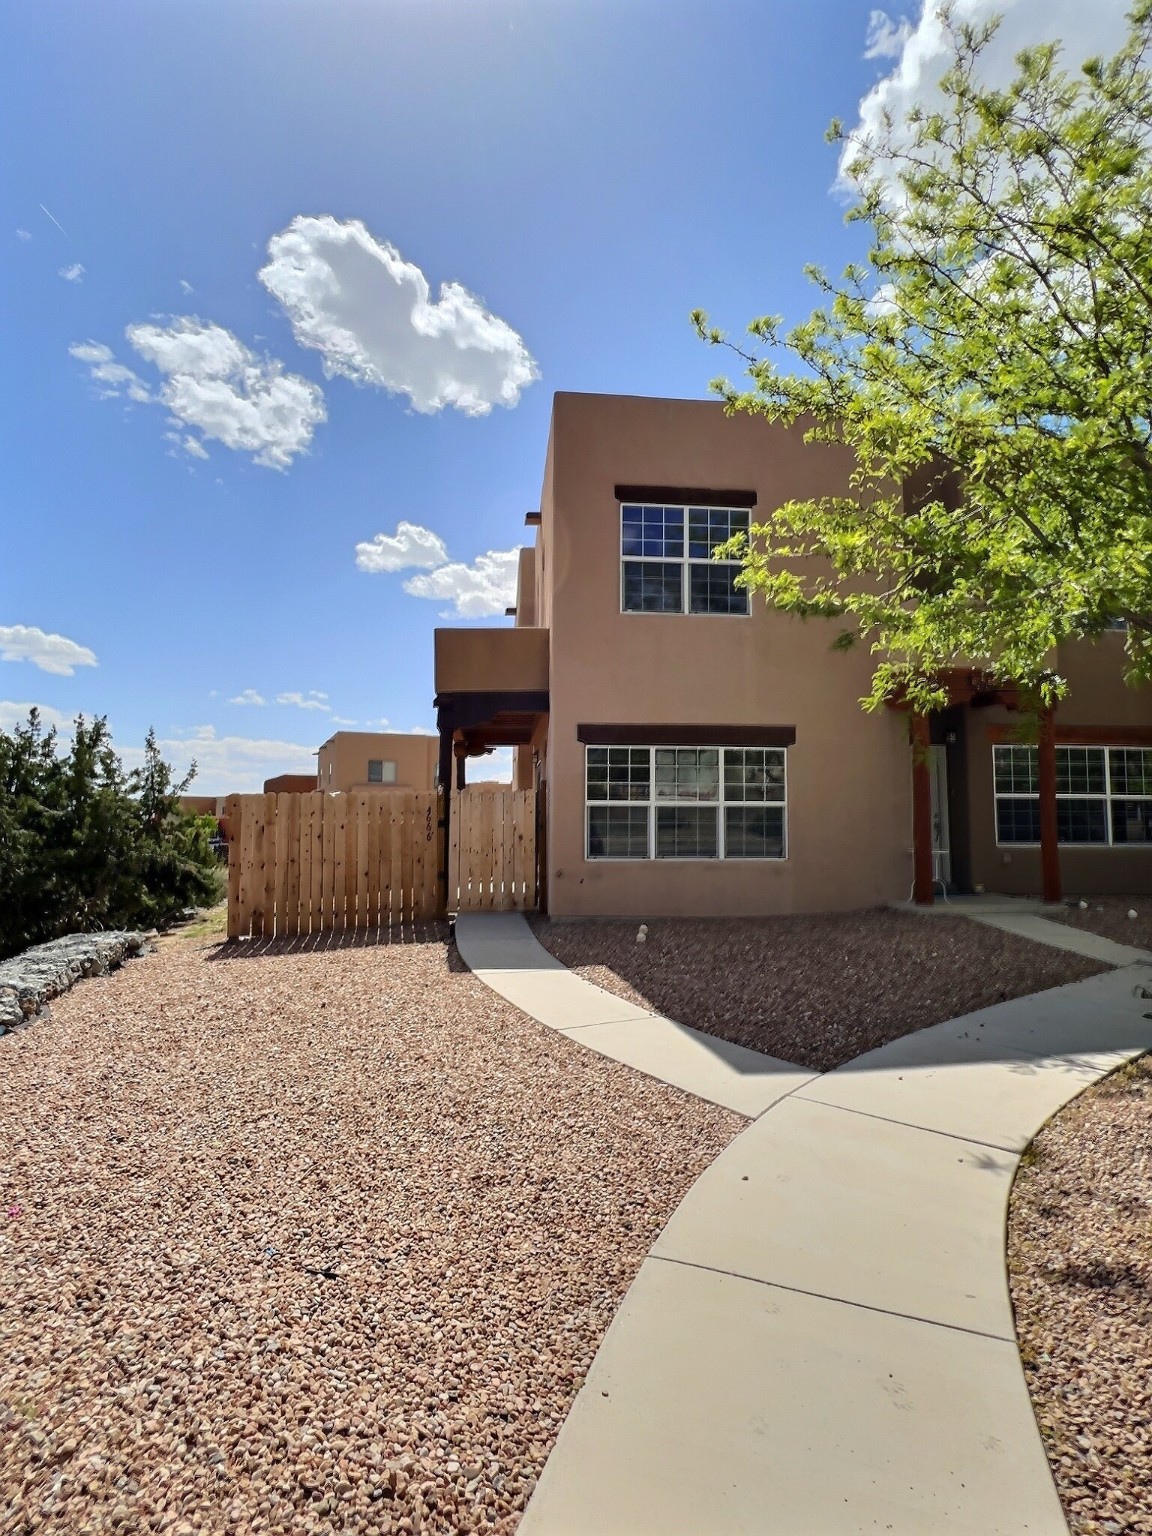 Lovely two-story townhome minutes from 599 bypass. Location 5 minutes from the Santa Fe Airport and 10 minutes via 599 to downtown Santa Fe. Home sits on a corner lot and backs to an open arroyo.  With a great view of the Sandias, this house features four bedrooms, one down and three up, two bathrooms, one down and one up. Home also offers a sweet fenced front courtyard with blackberry and strawberry bushes planted with love by the owner. Home has brand new carpet and is sold "as is."